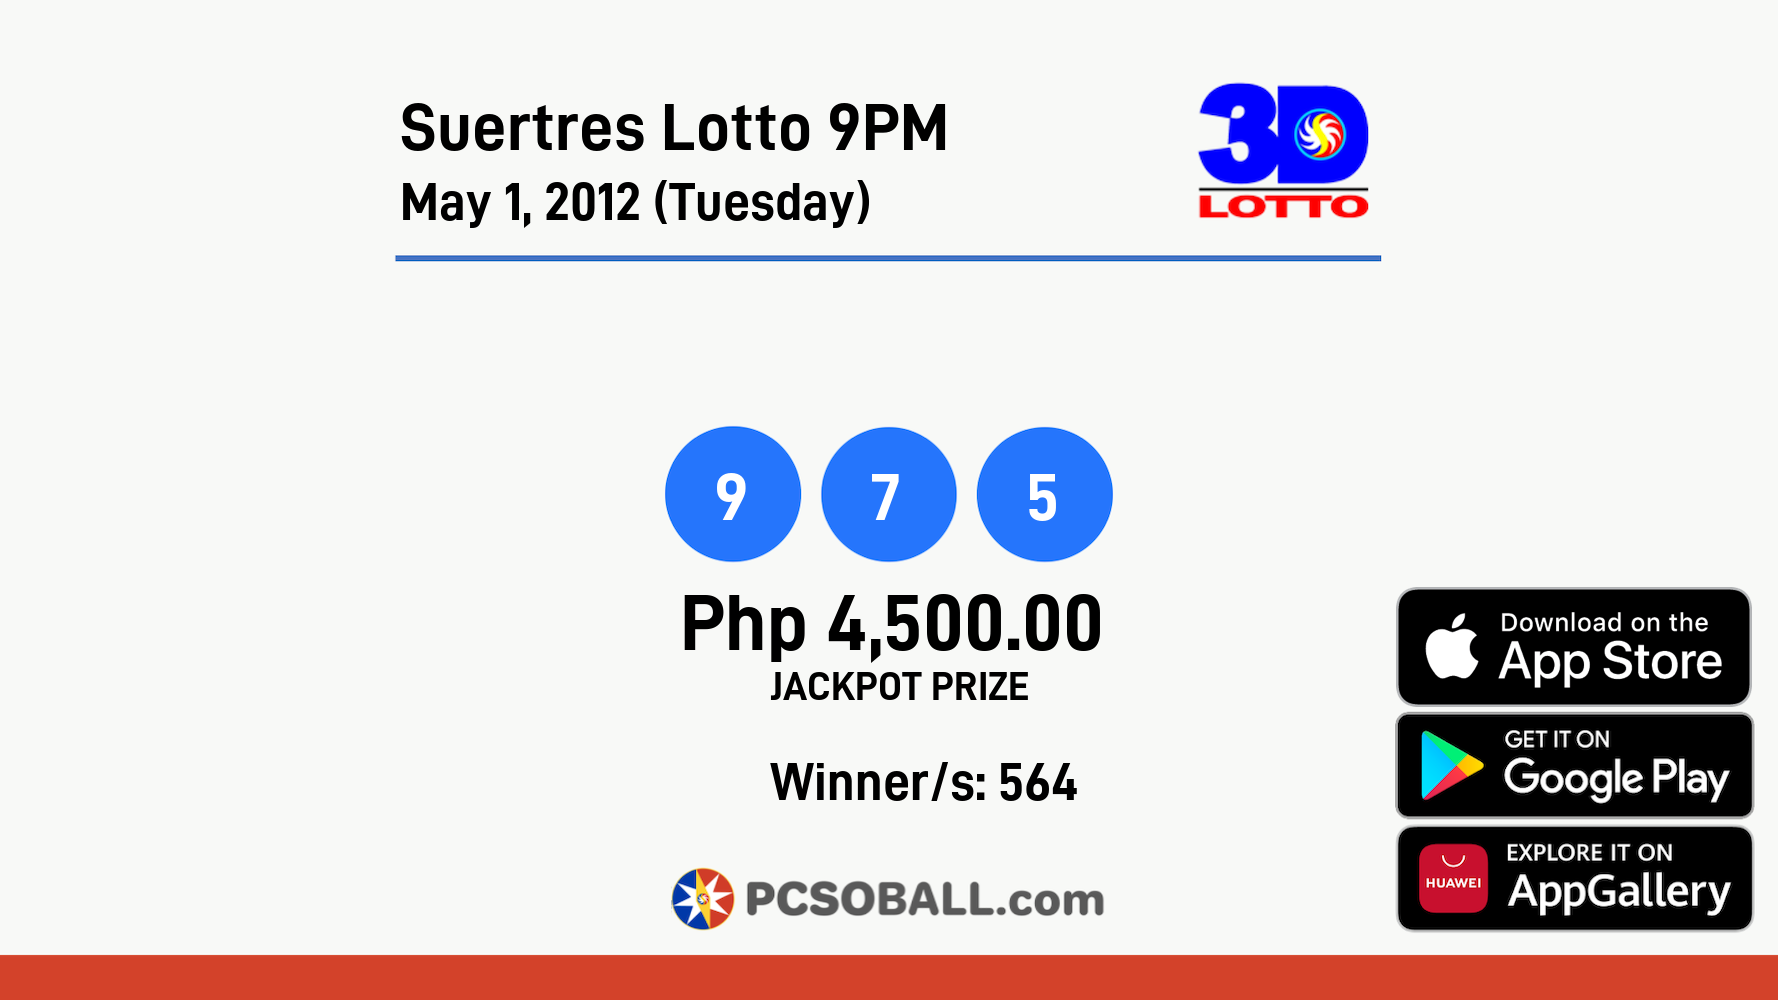 Suertres Lotto 9PM May 1, 2012 (Tuesday) Result